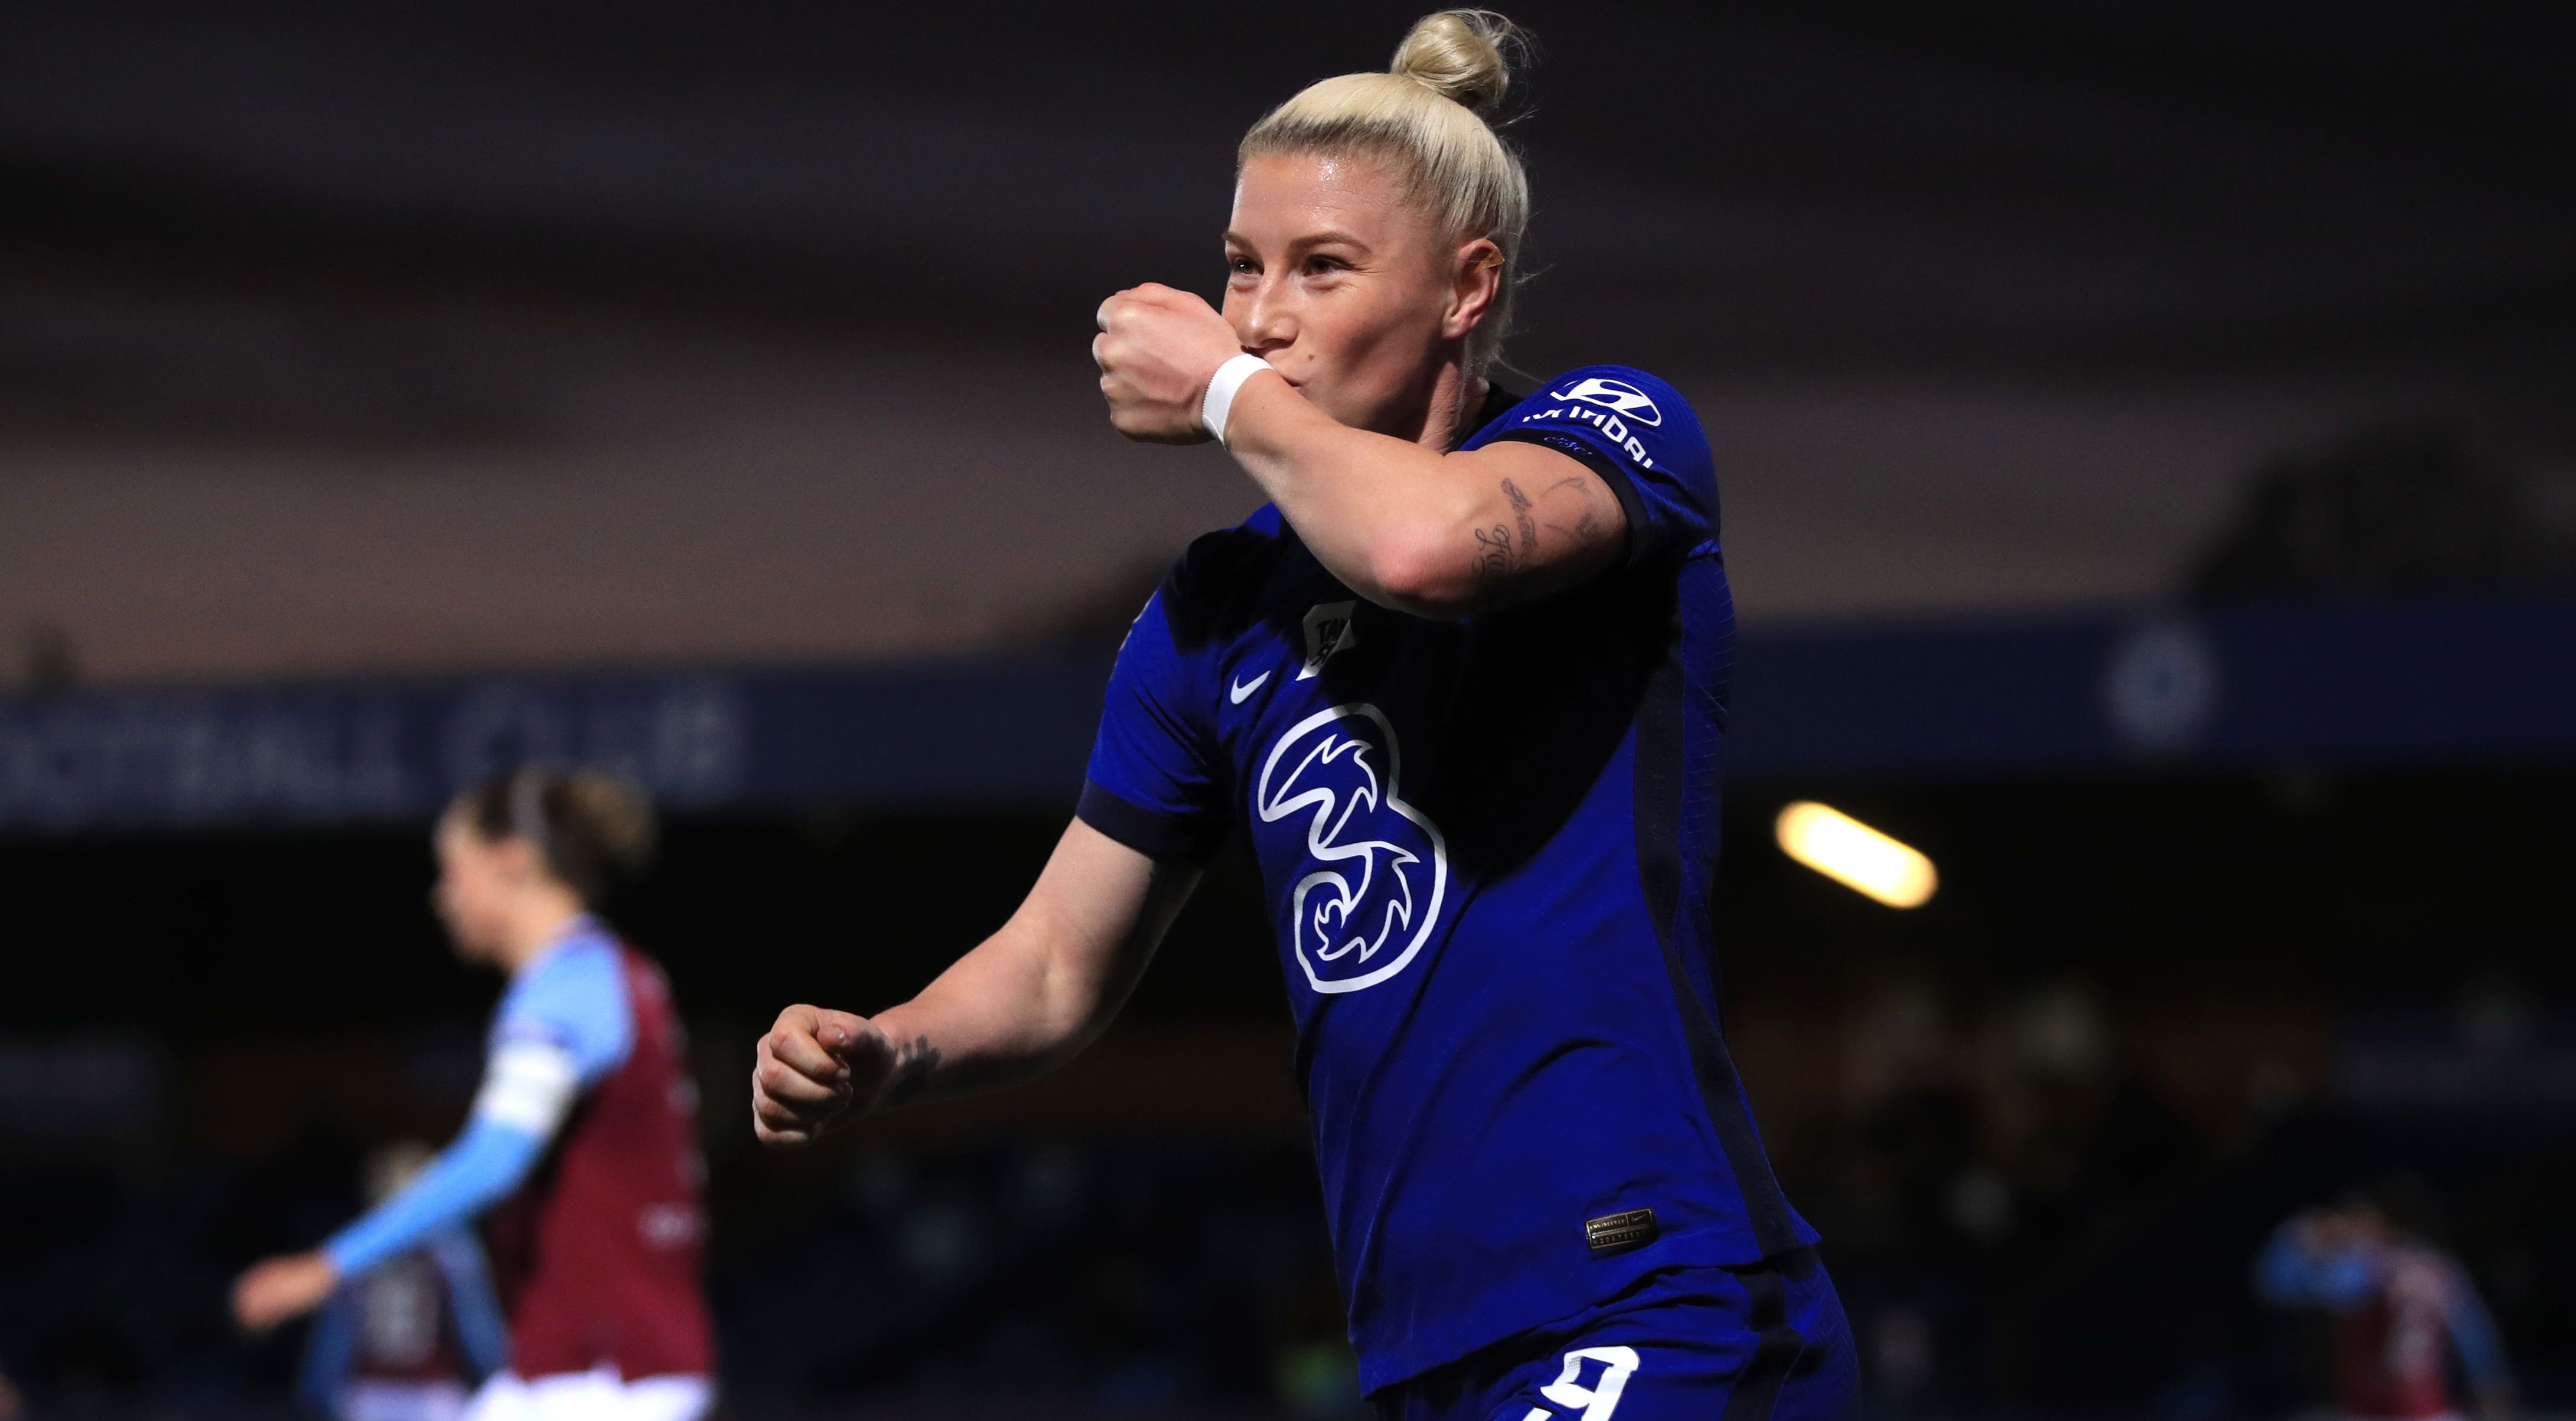 Beth England joins Tottenham from Chelsea in reported record